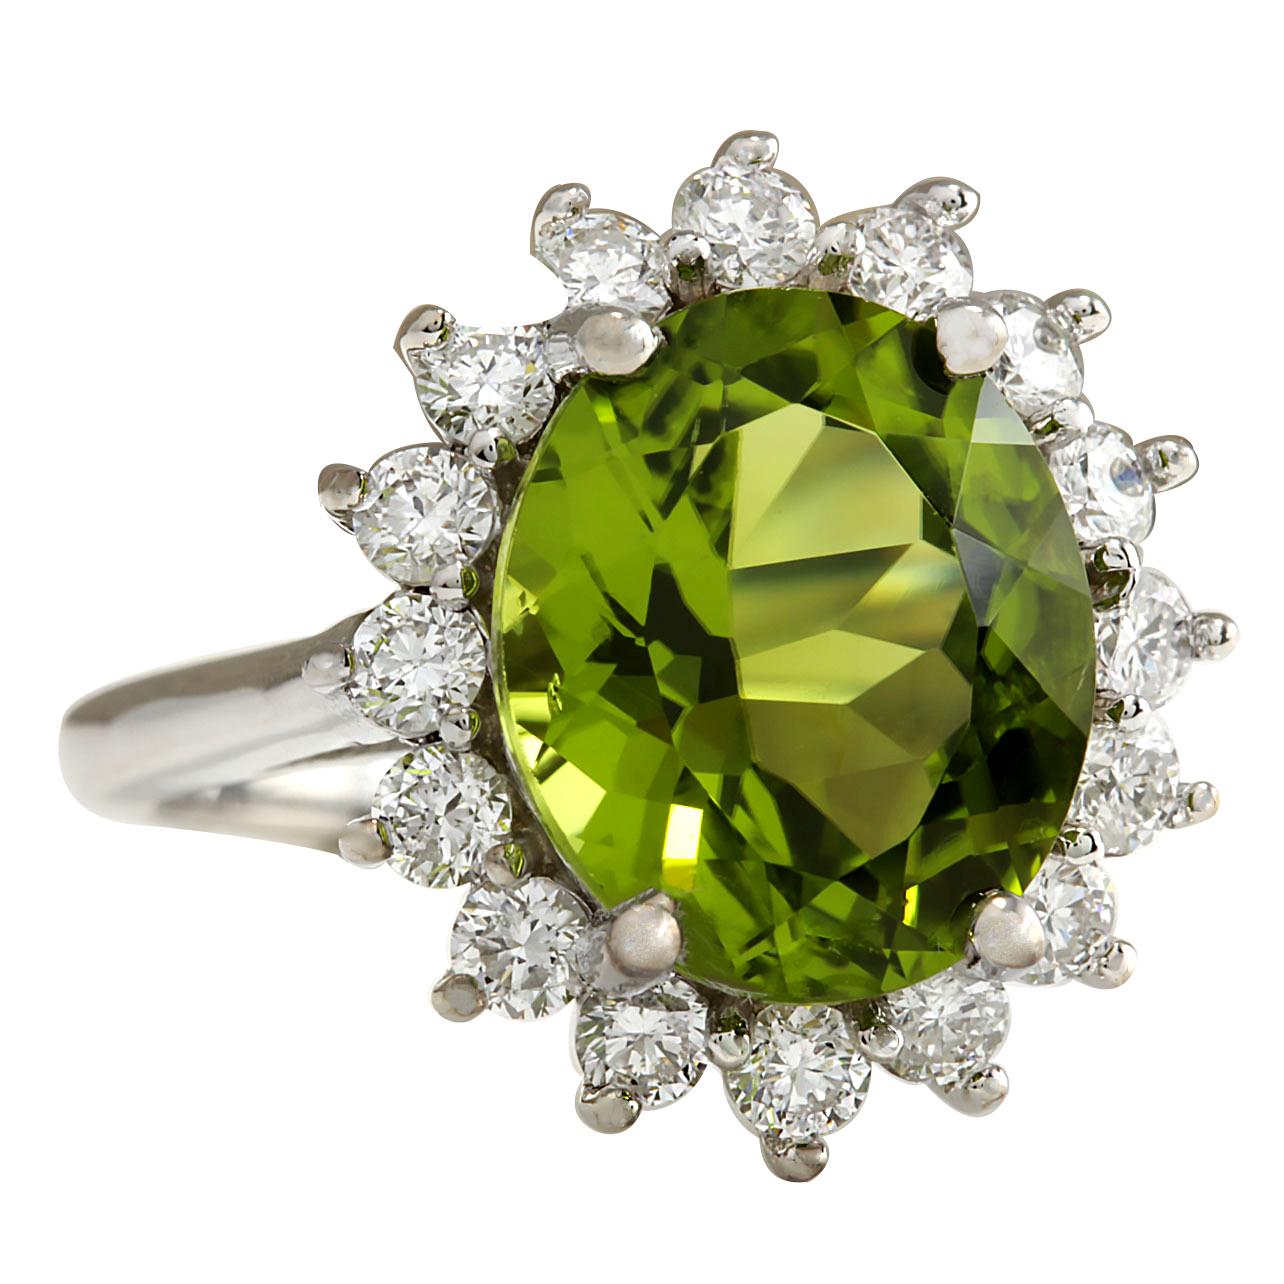 Stamped: 14K White Gold
Total Ring Weight: 6.0 Grams
Total Natural Peridot Weight is 6.51 Carat (Measures: 12.00x10.00 mm)
Color: Green
Diamond Weight: Total Natural Diamond Weight is 1.08 Carat
Color: F-G, Clarity: VS2-SI1
Face Measures: